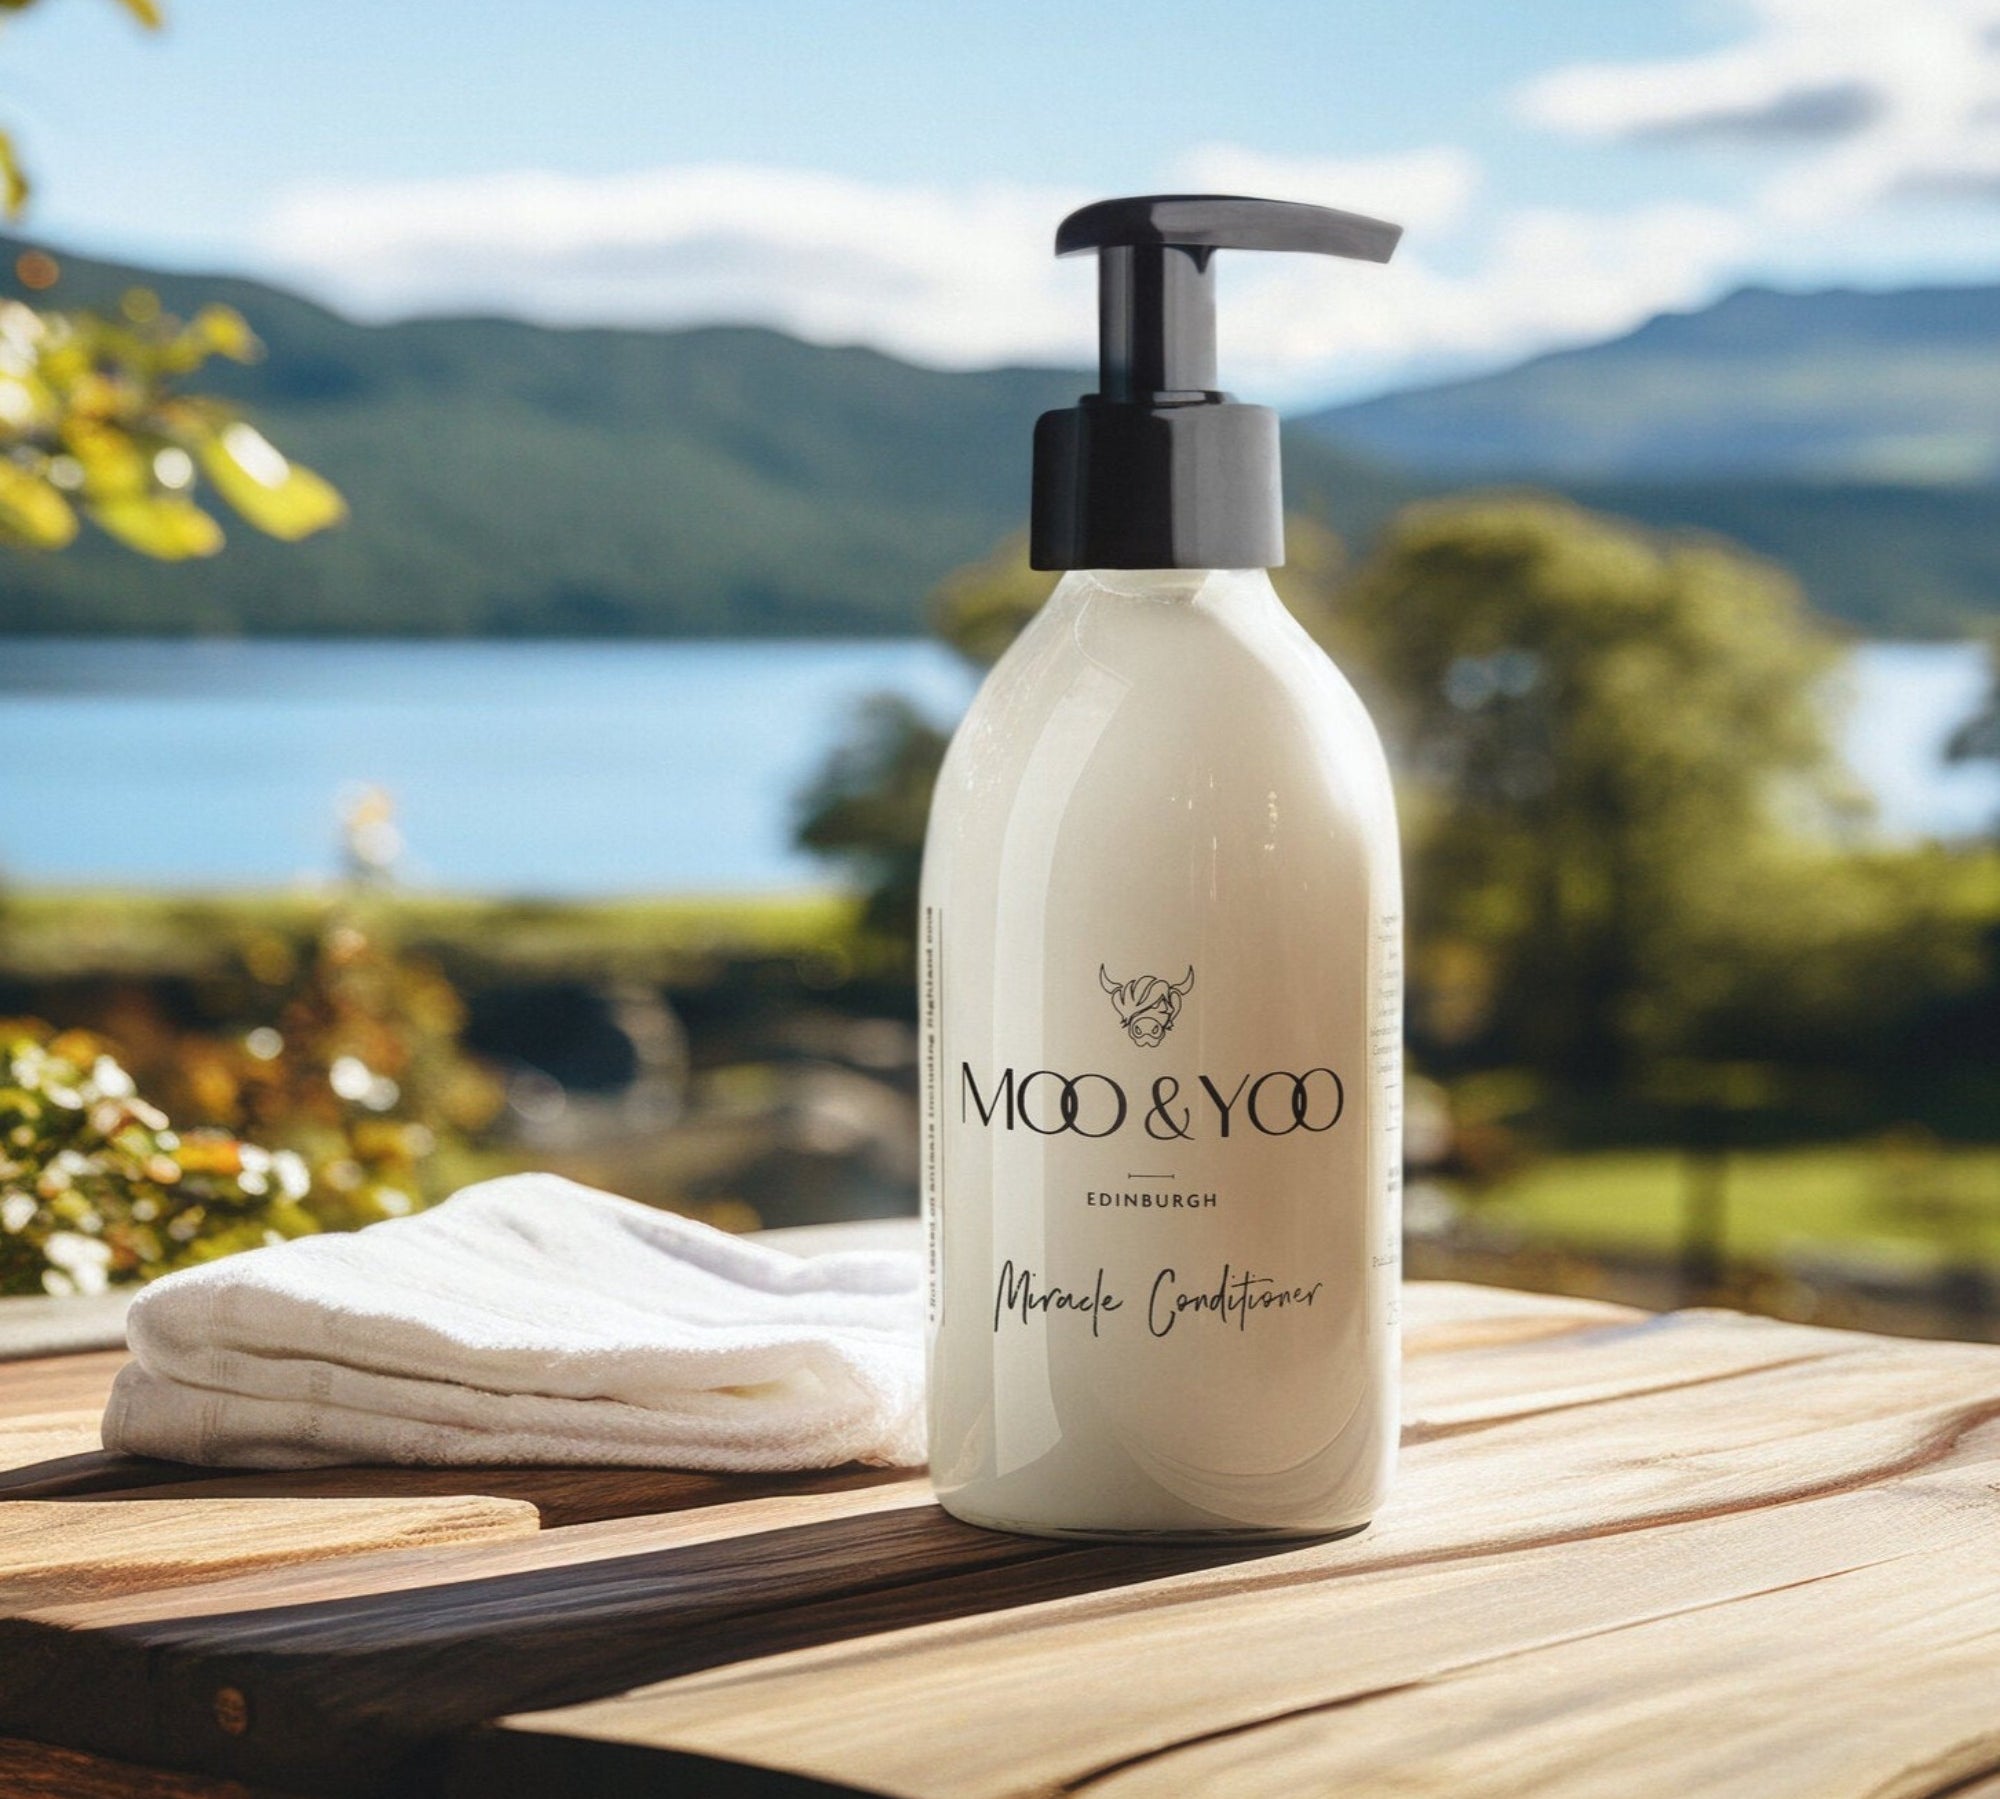 A close up image of a glass bottle of Moo and Yoo Miracle conditioner with a pump. It is placed on a bench overlooking a Scottish loch. There is a small towel to the side. It’s a sunny day with some cloud.